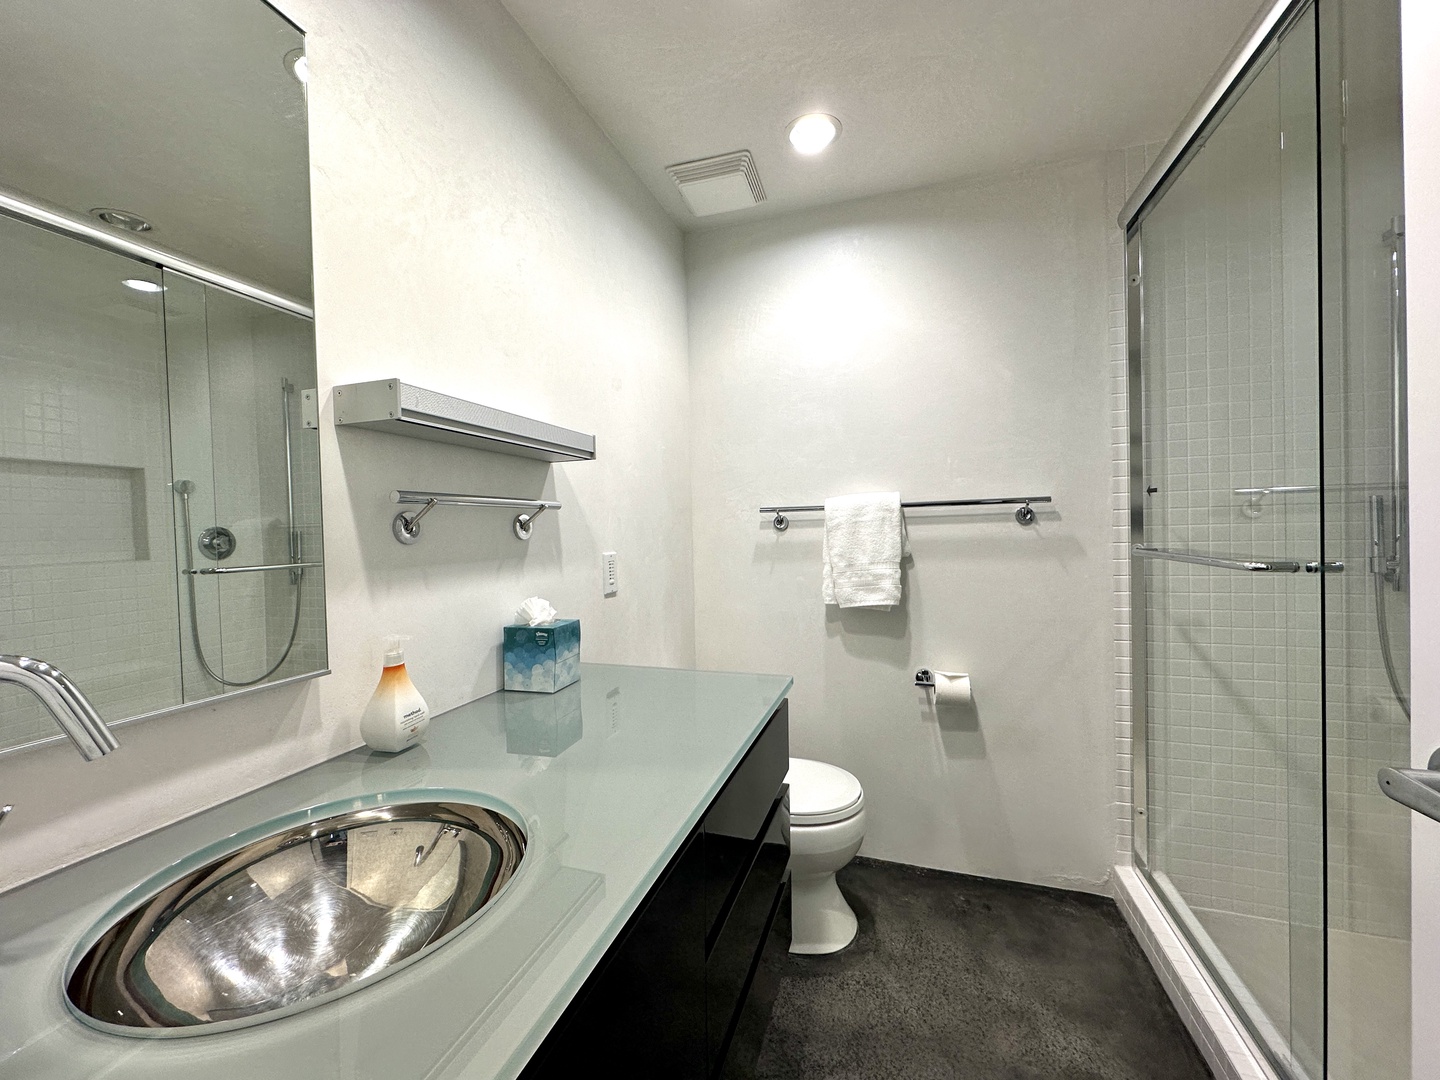 This 1st floor ensuite includes a large vanity & glass shower